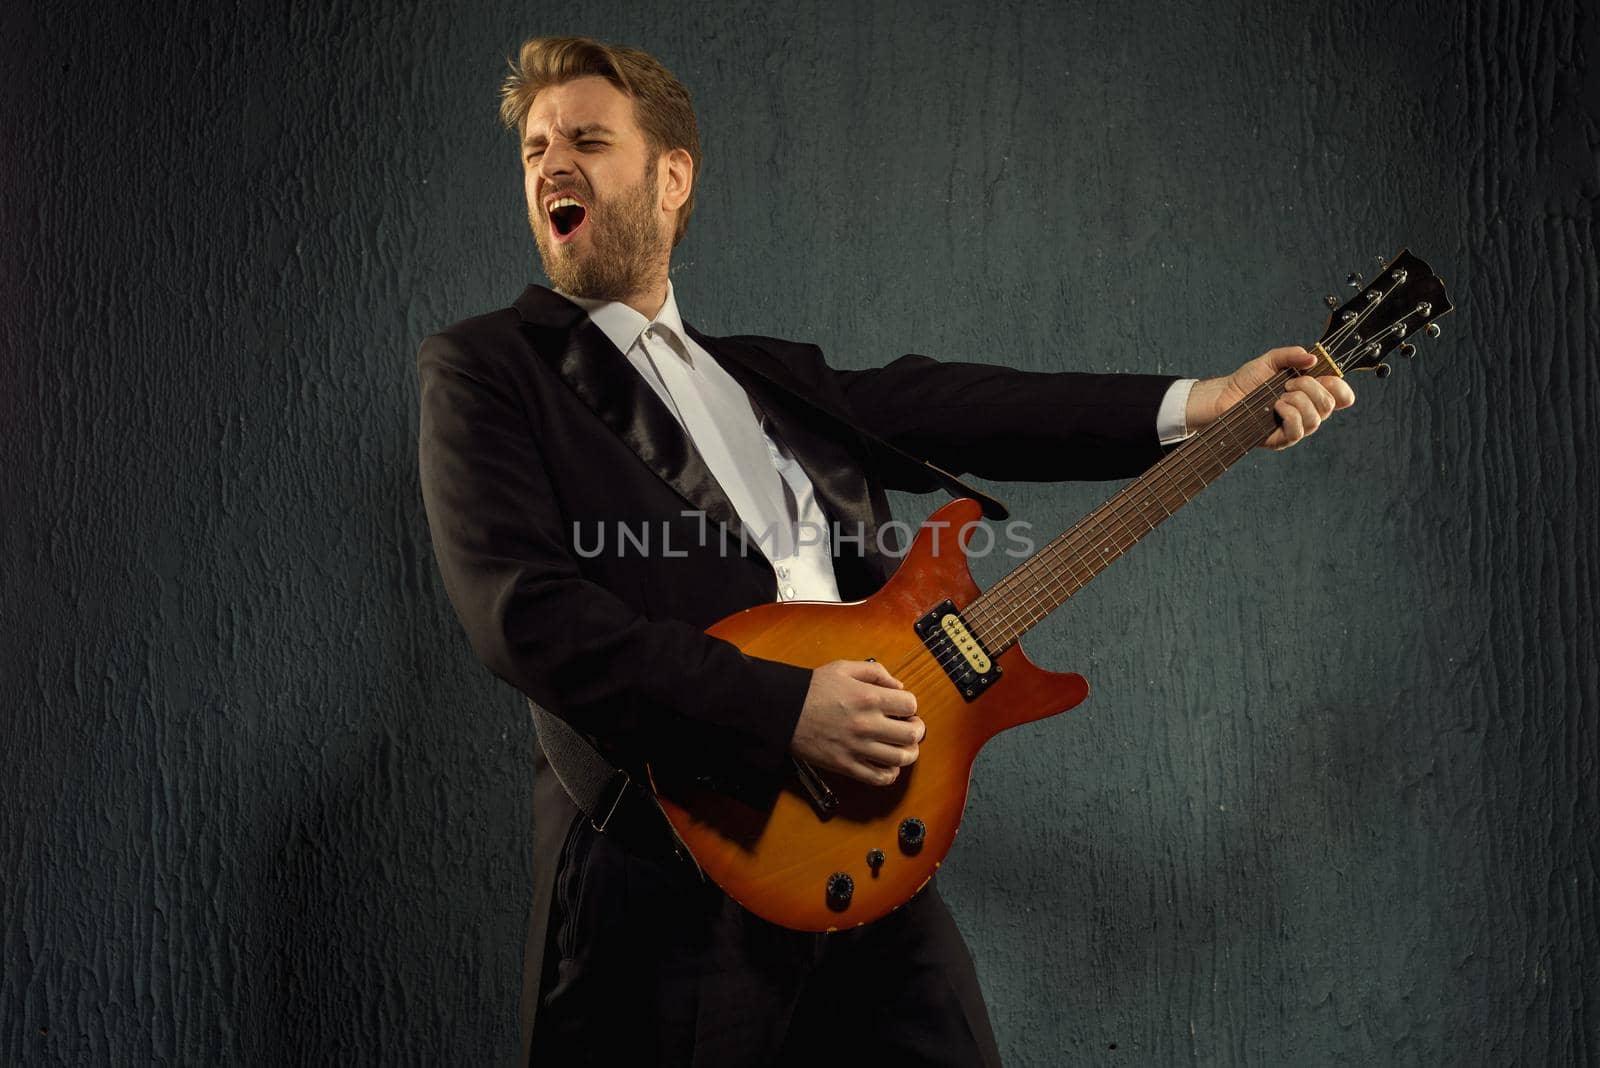 Guitar player with beard and black tailcoat emotionally plays music